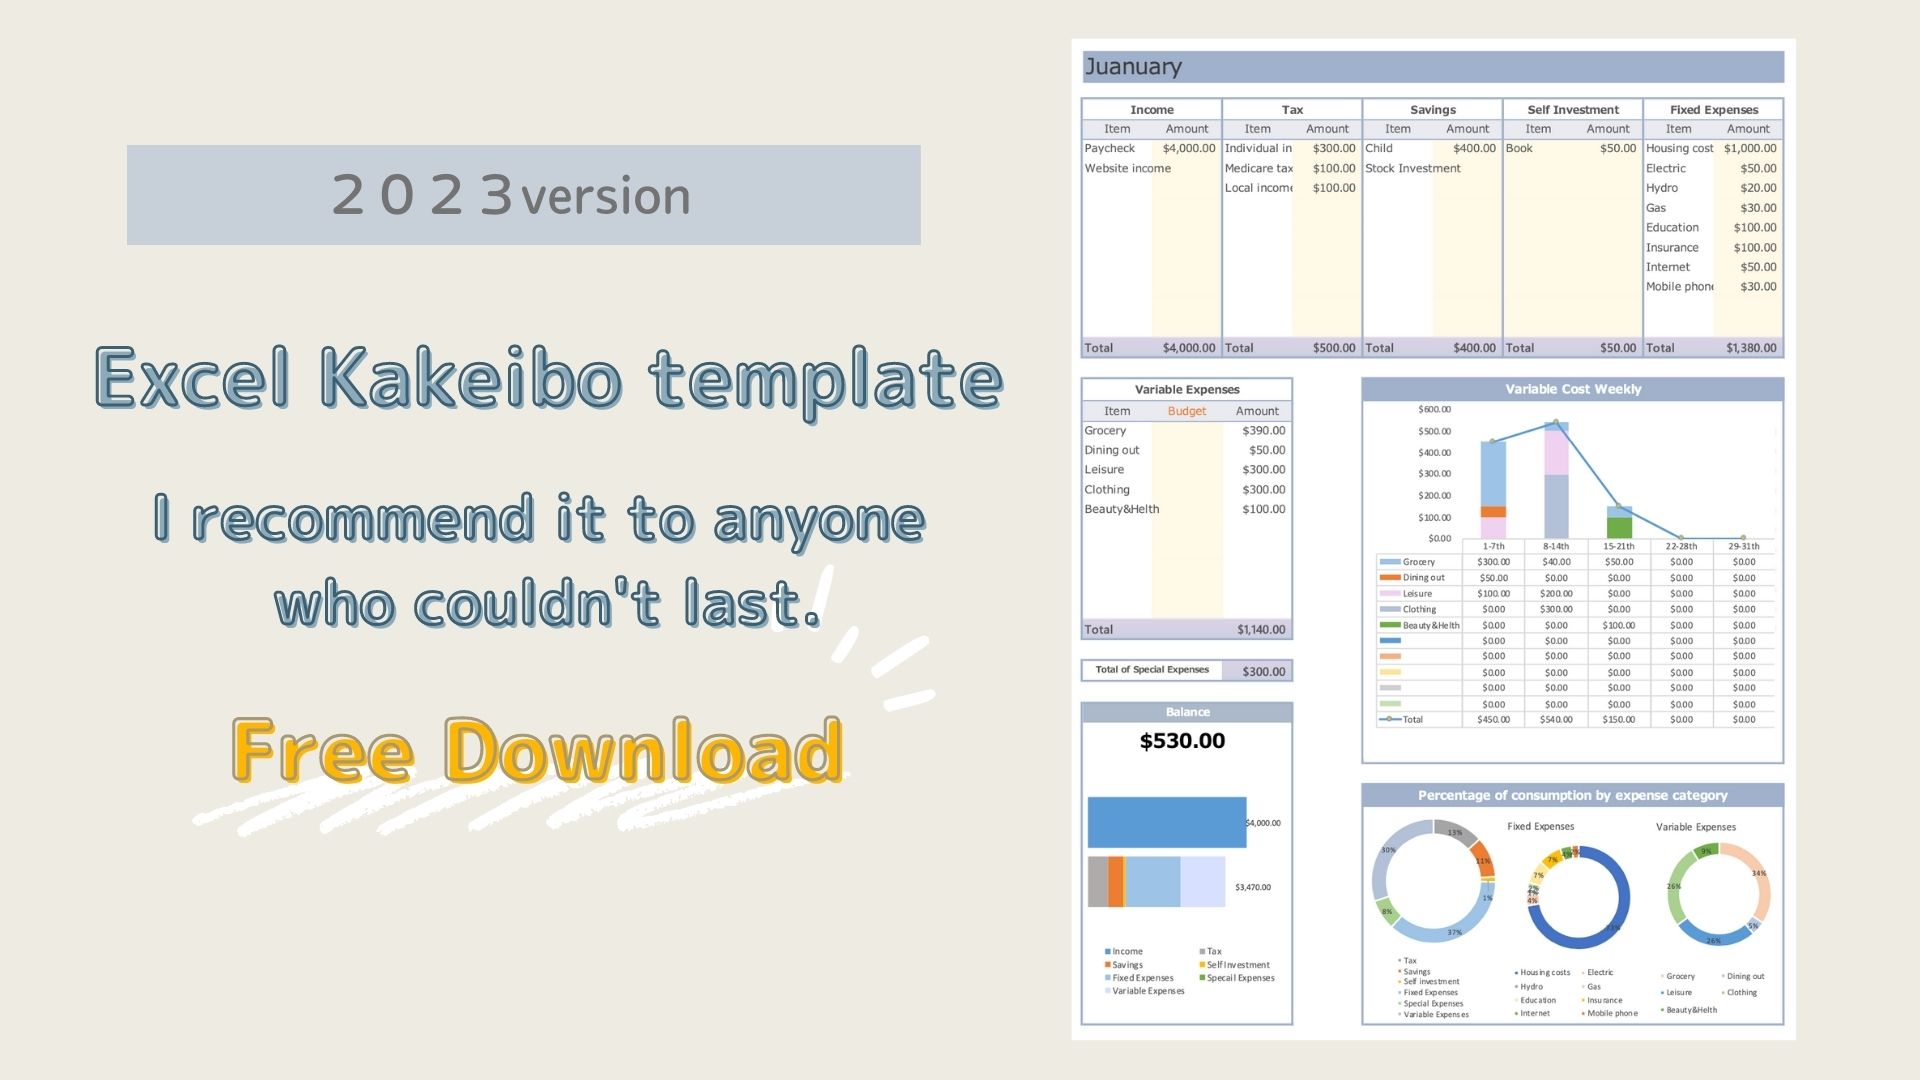 2023 version] Excel Kakeibo template(free),I recommend it to